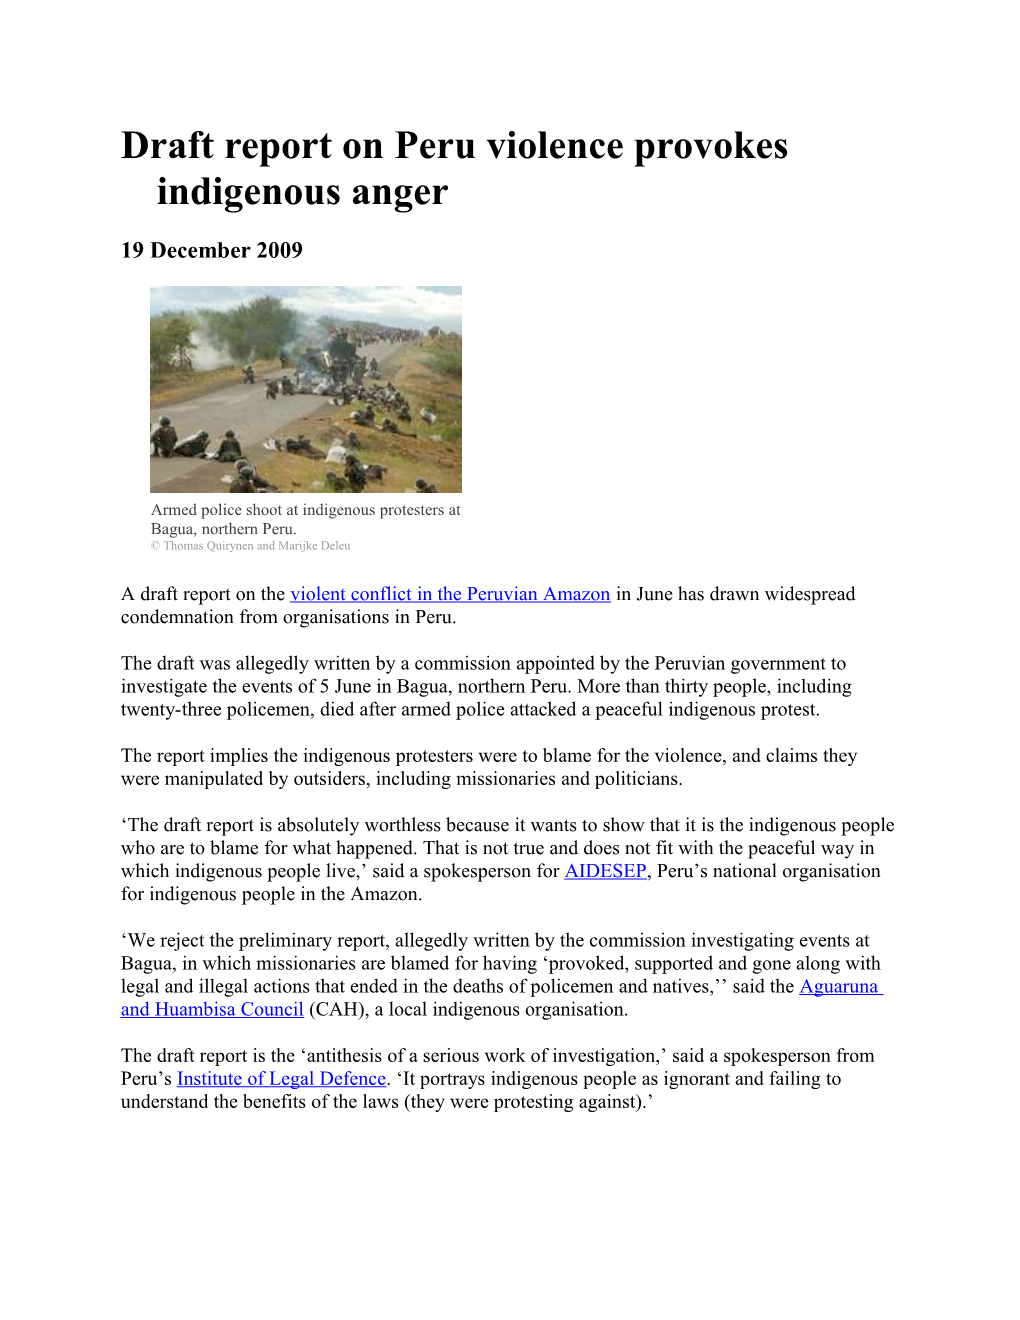 Draft Report on Peru Violence Provokes Indigenous Anger